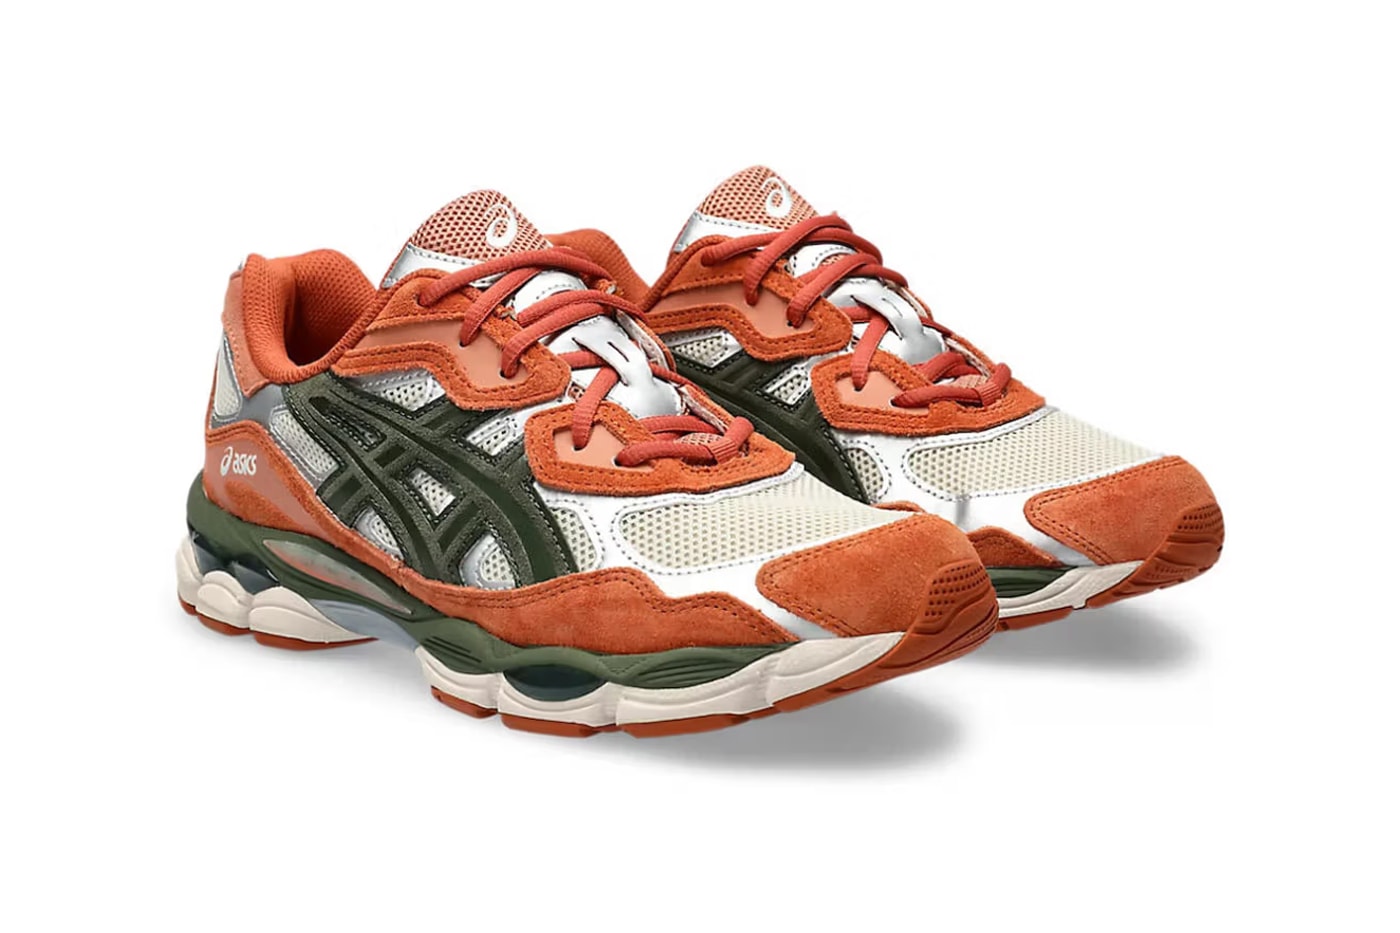 ASICS GEL-NYC Surfaces in “Oatmeal/Forest” Footwear